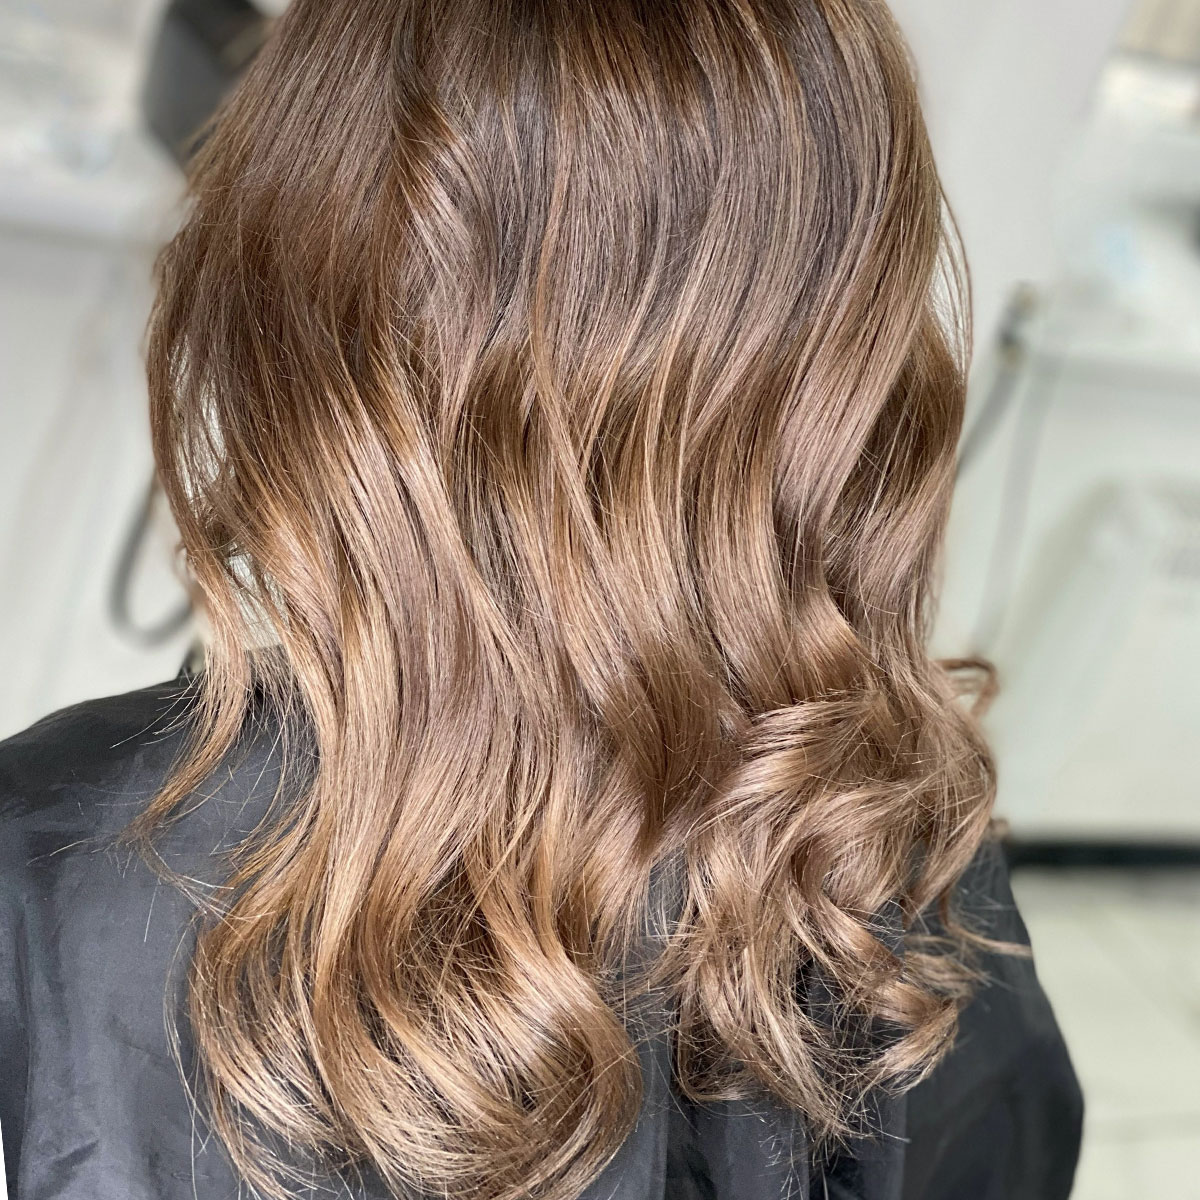 light brown hair curled salon healthy tresses curly